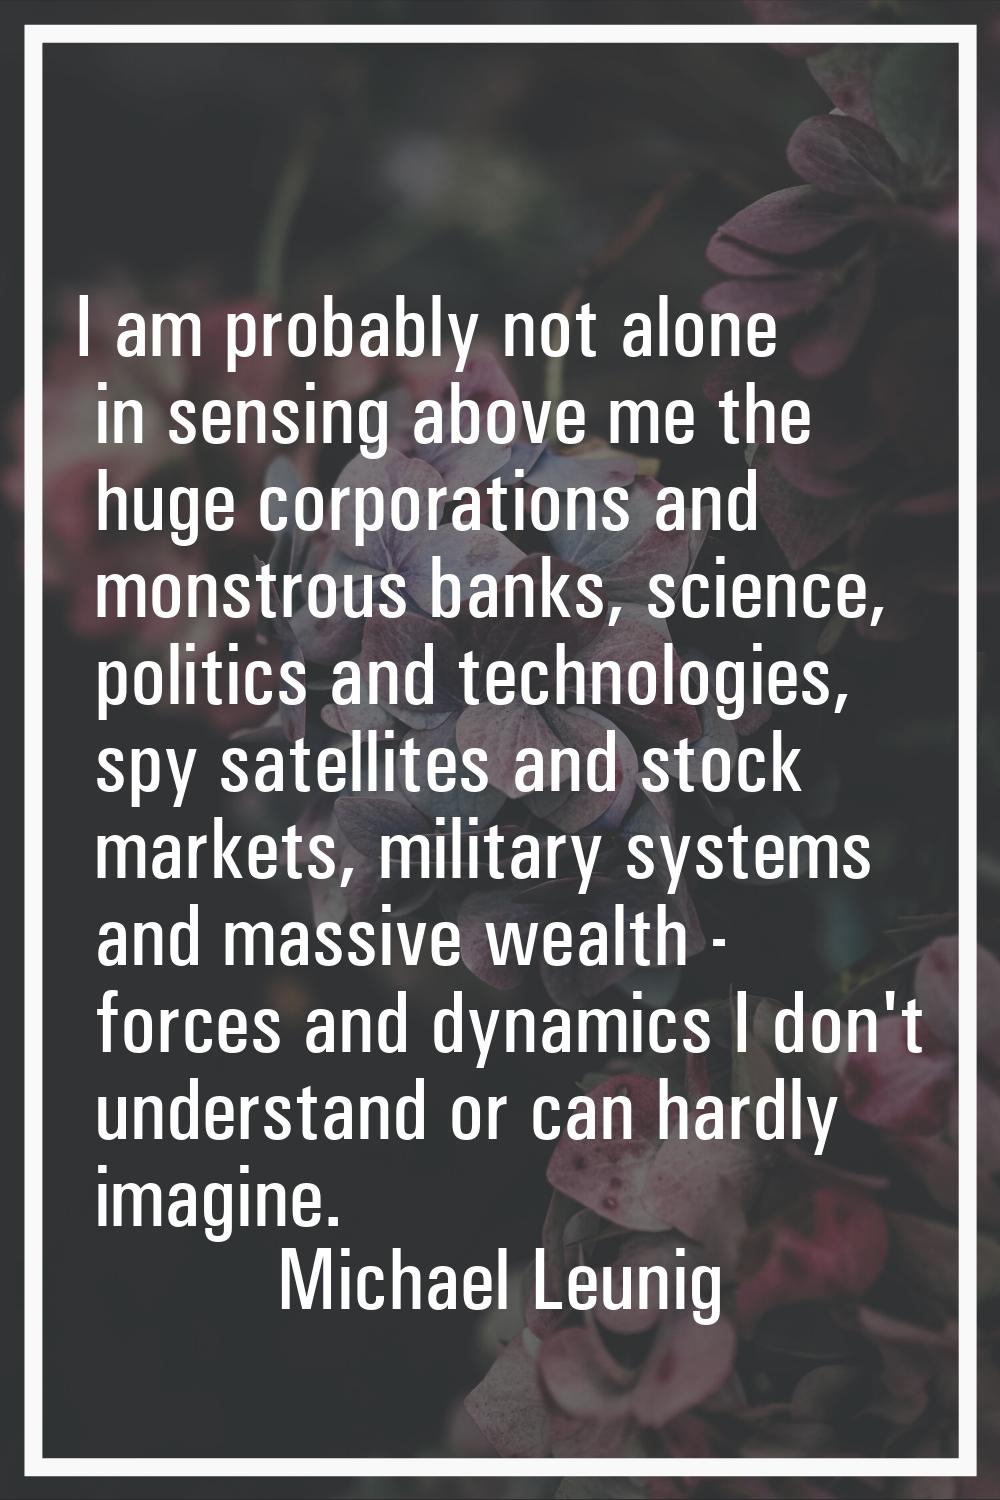 I am probably not alone in sensing above me the huge corporations and monstrous banks, science, pol